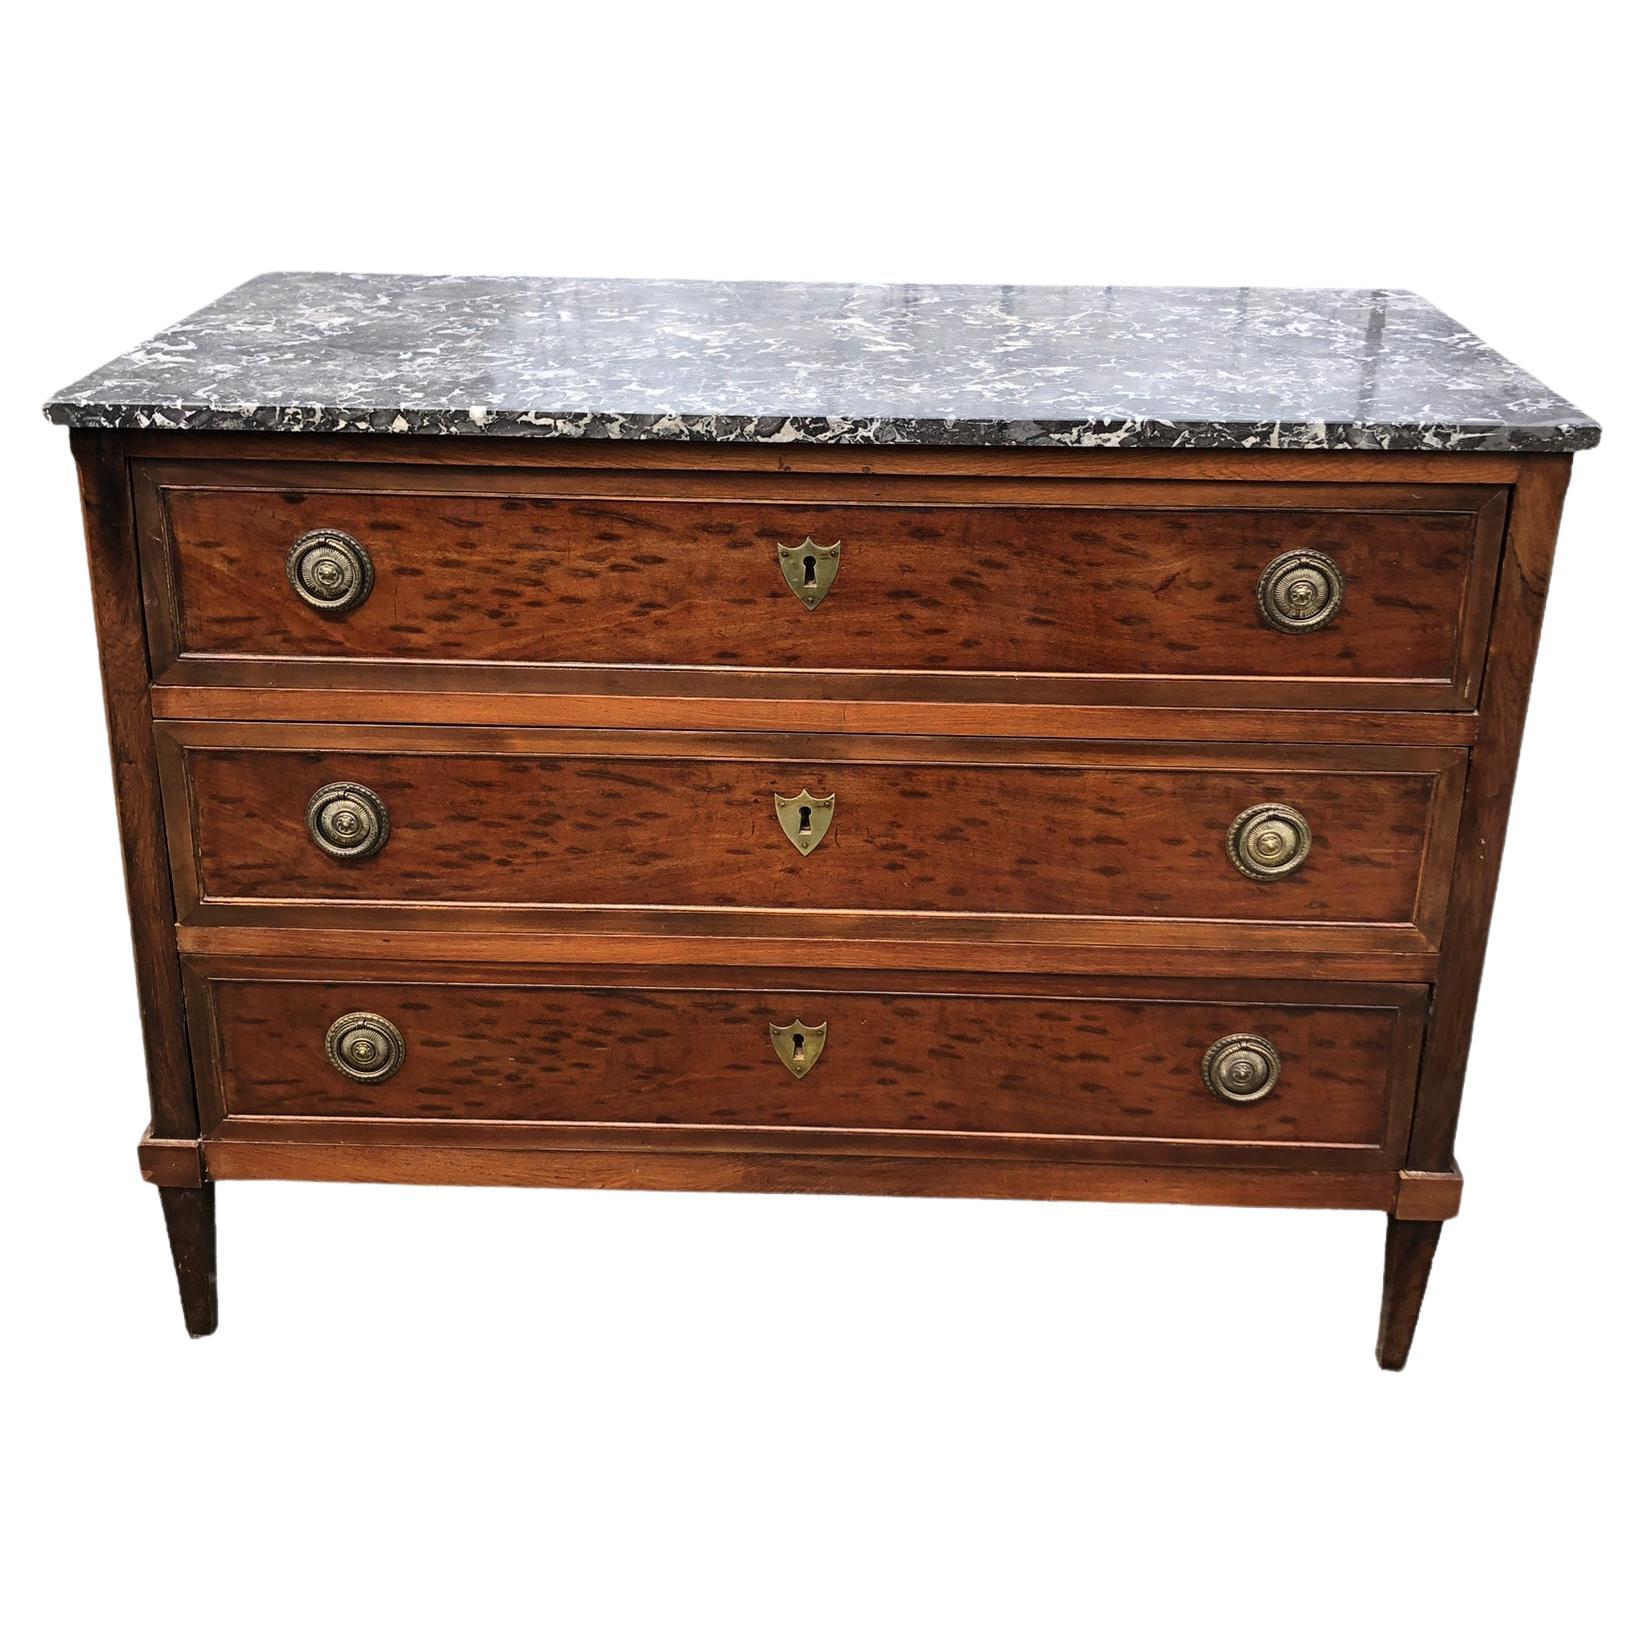 19th Century Louis XVI Style Marble Top Plum Pudding Mahogany Chest